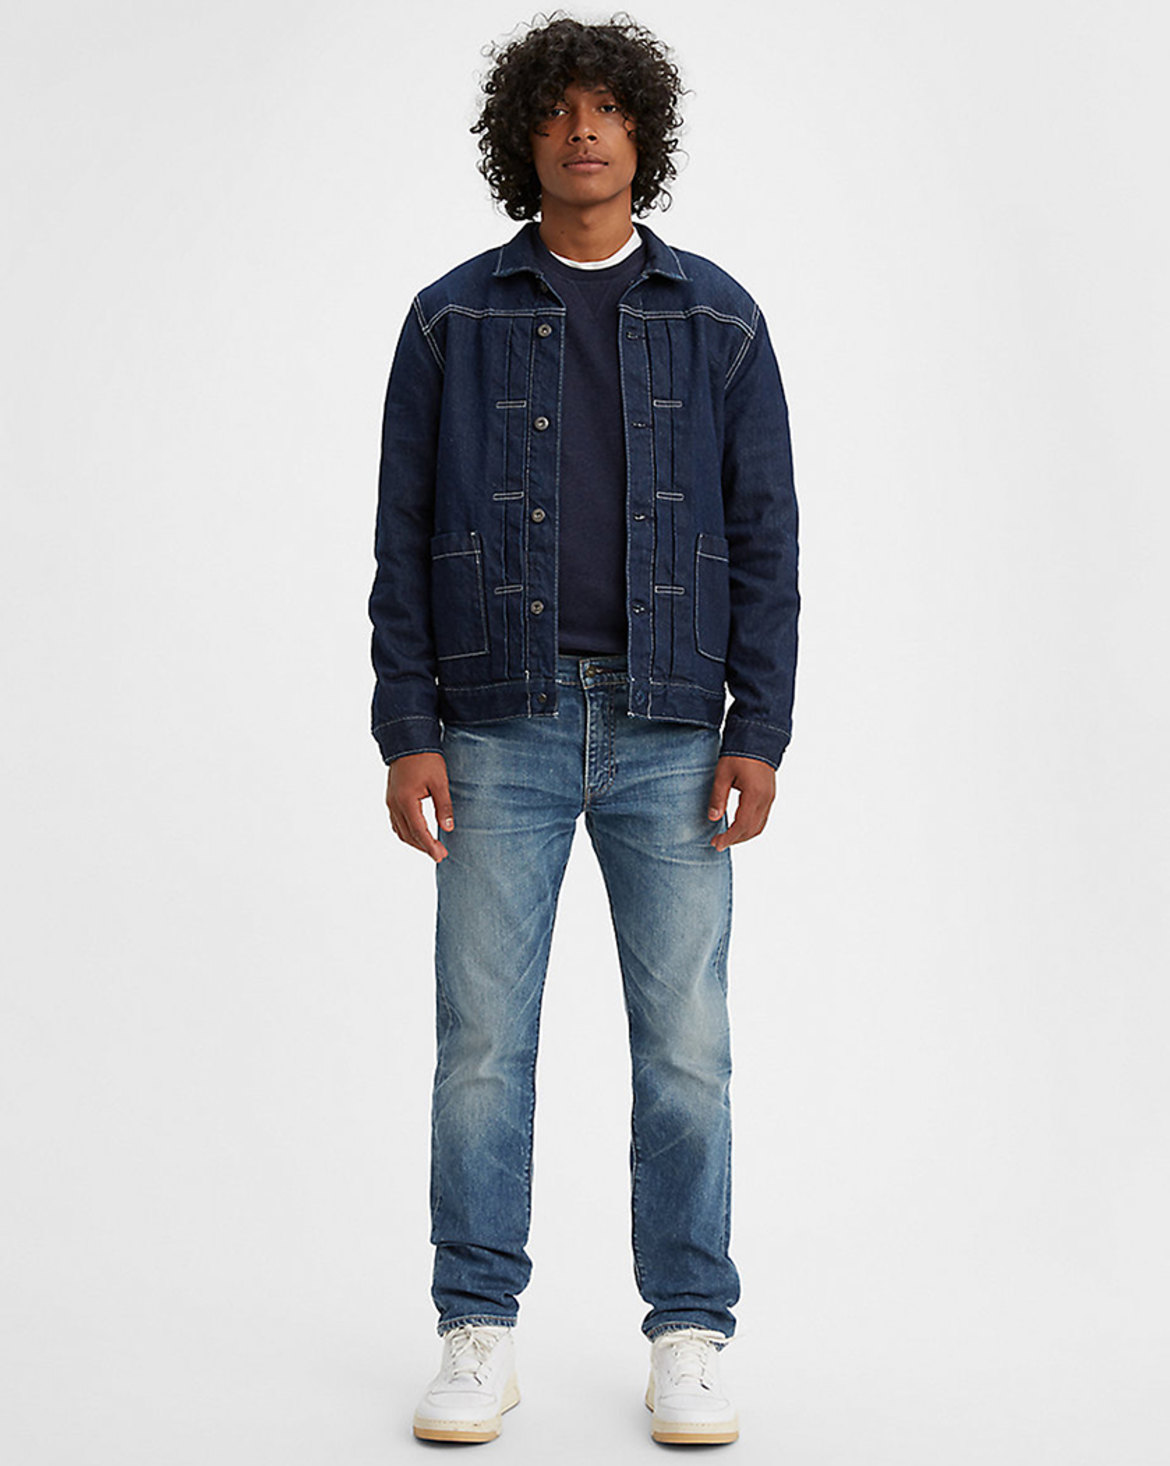 Levi’s® Made & Crafted® Made in Japan 511™ Slim Fit Jeans | Levi